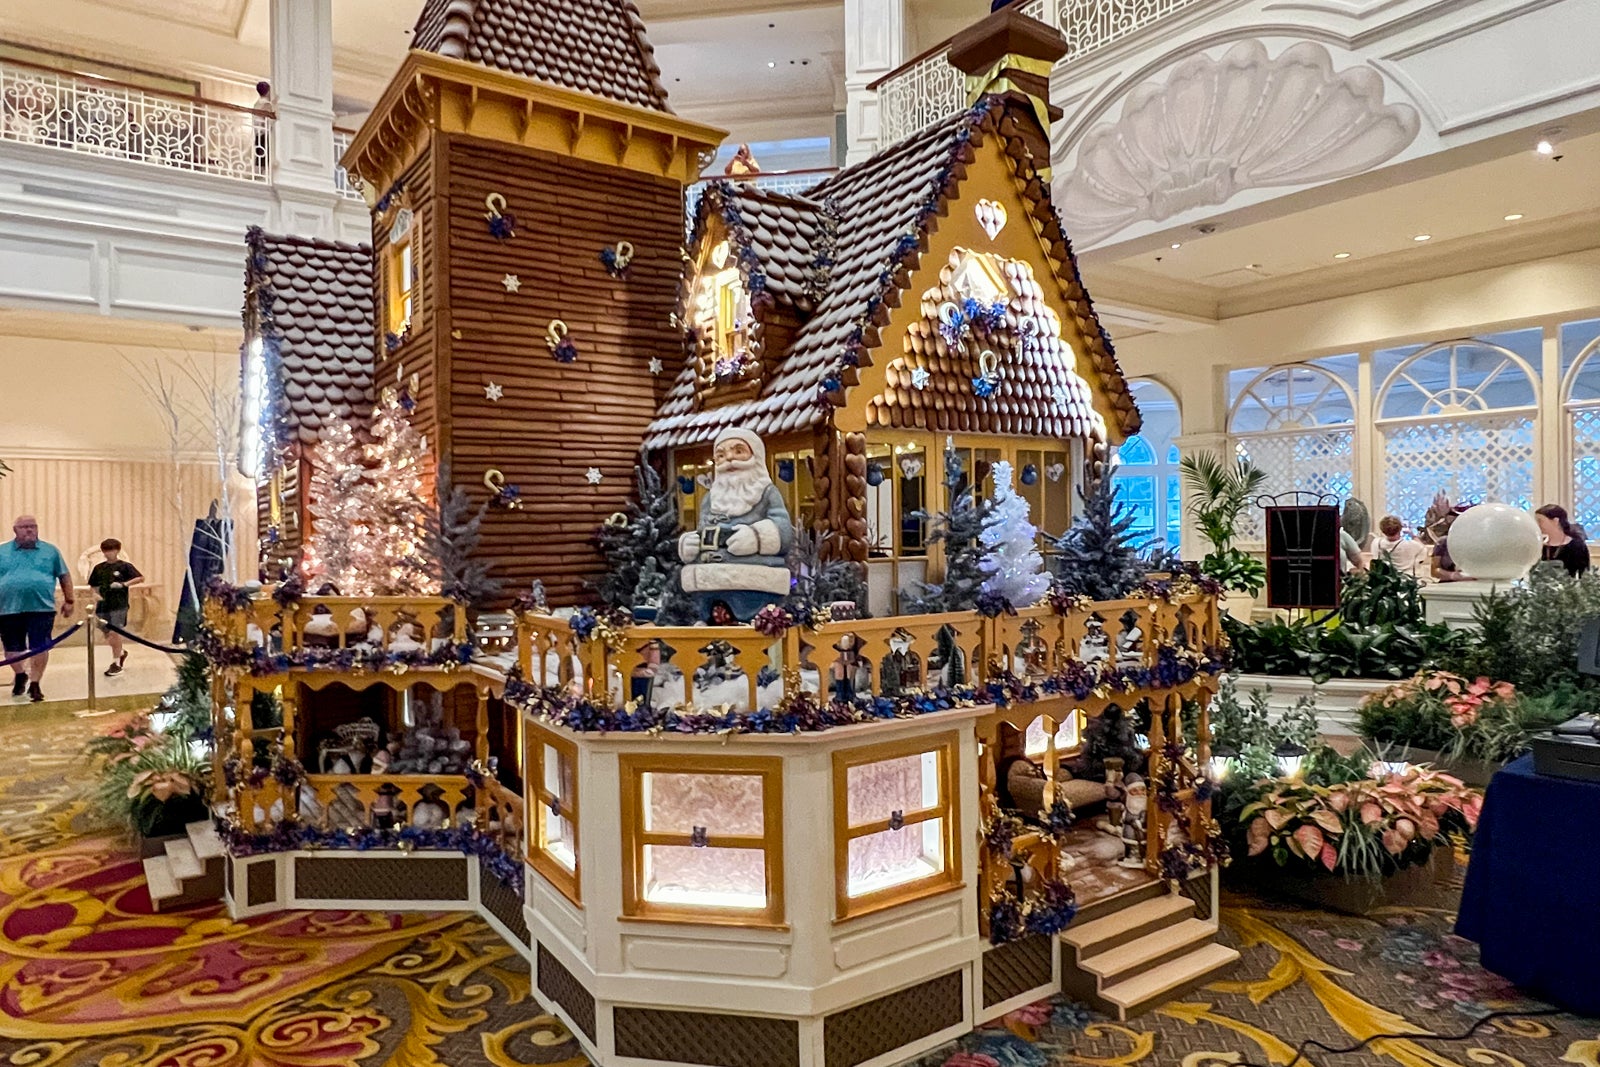 life-size gingerbread house